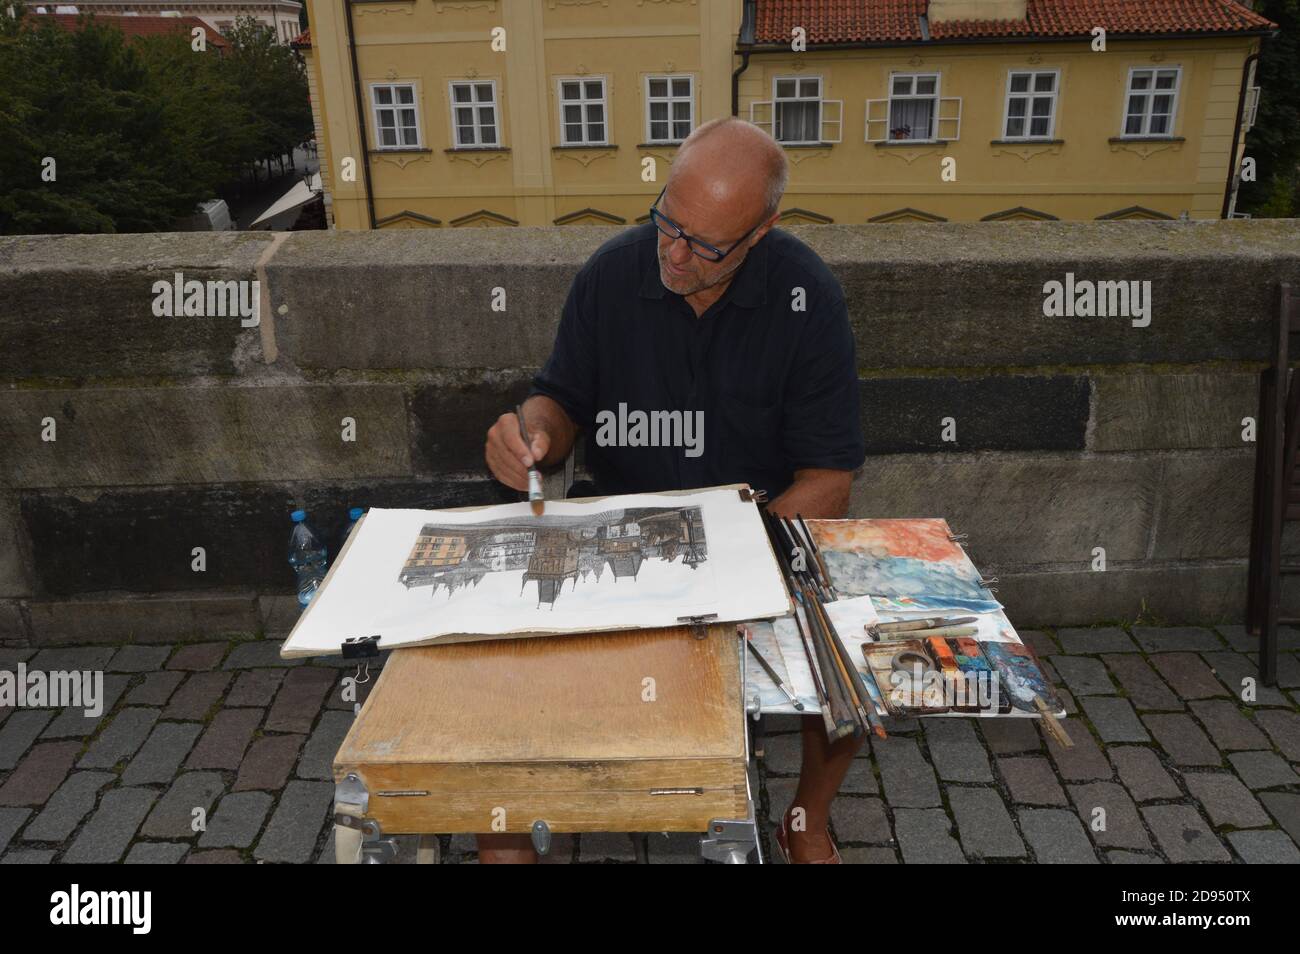 AMBERES, BELGIUM - Jul 29, 2016: An artist painting in the streets of Amberes Belgium Stock Photo